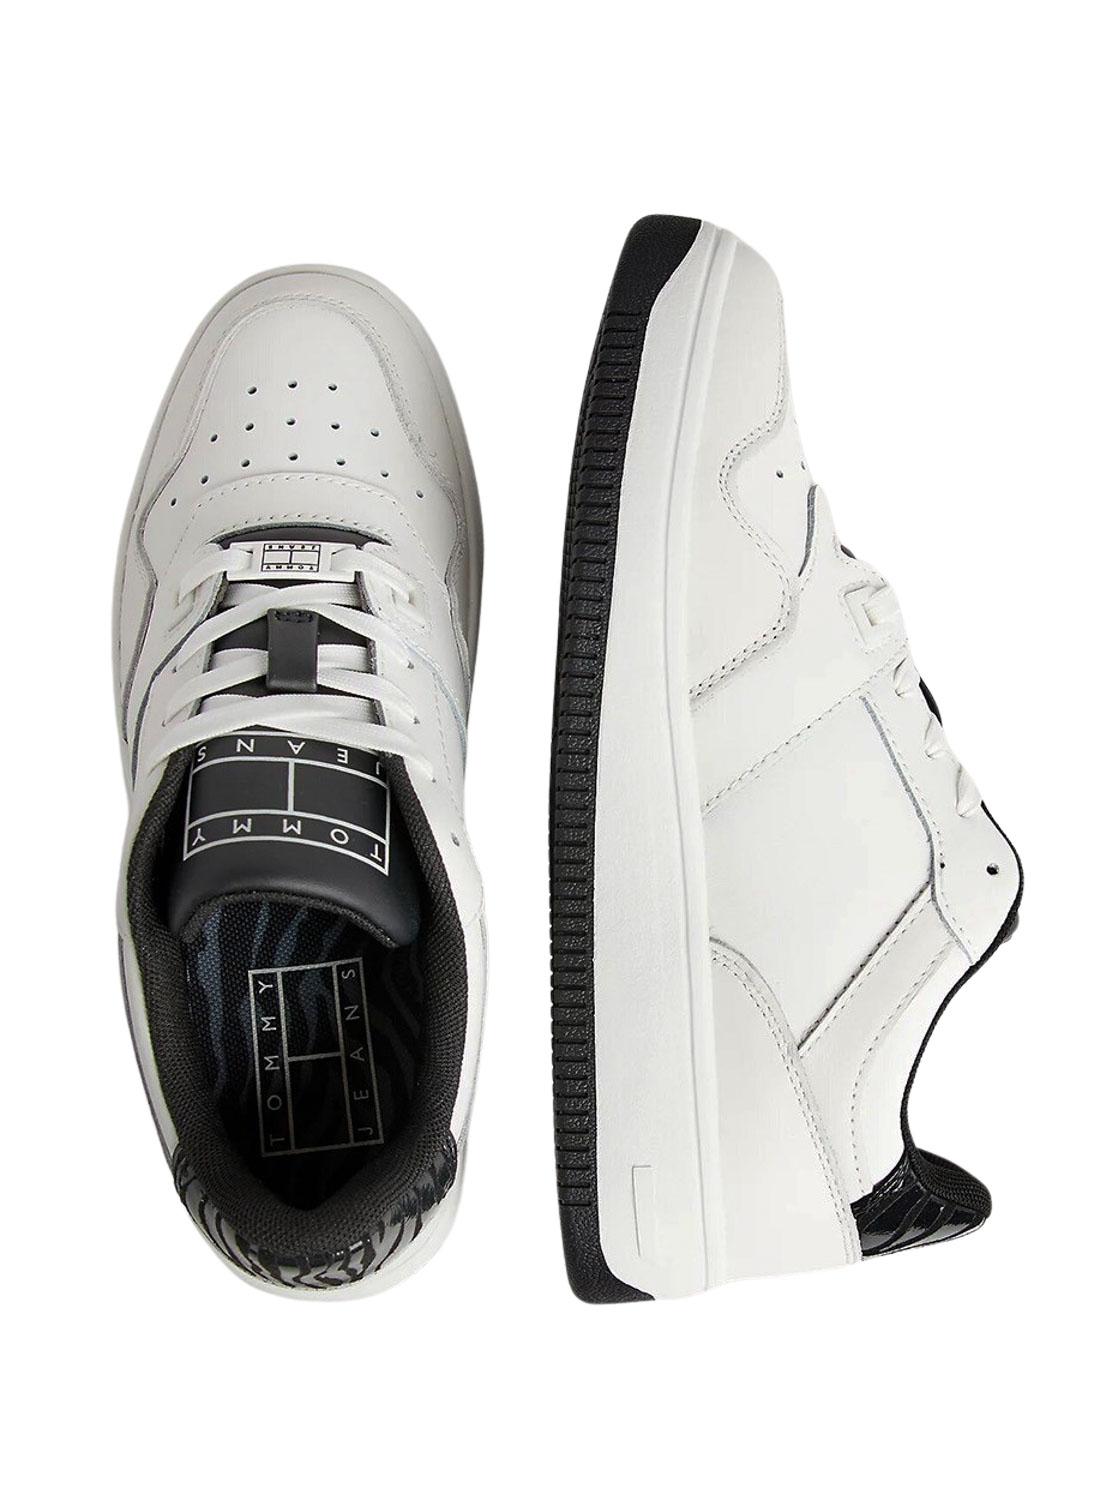 Sneakers Tommy Hilfiger Cestino Bianco Donna